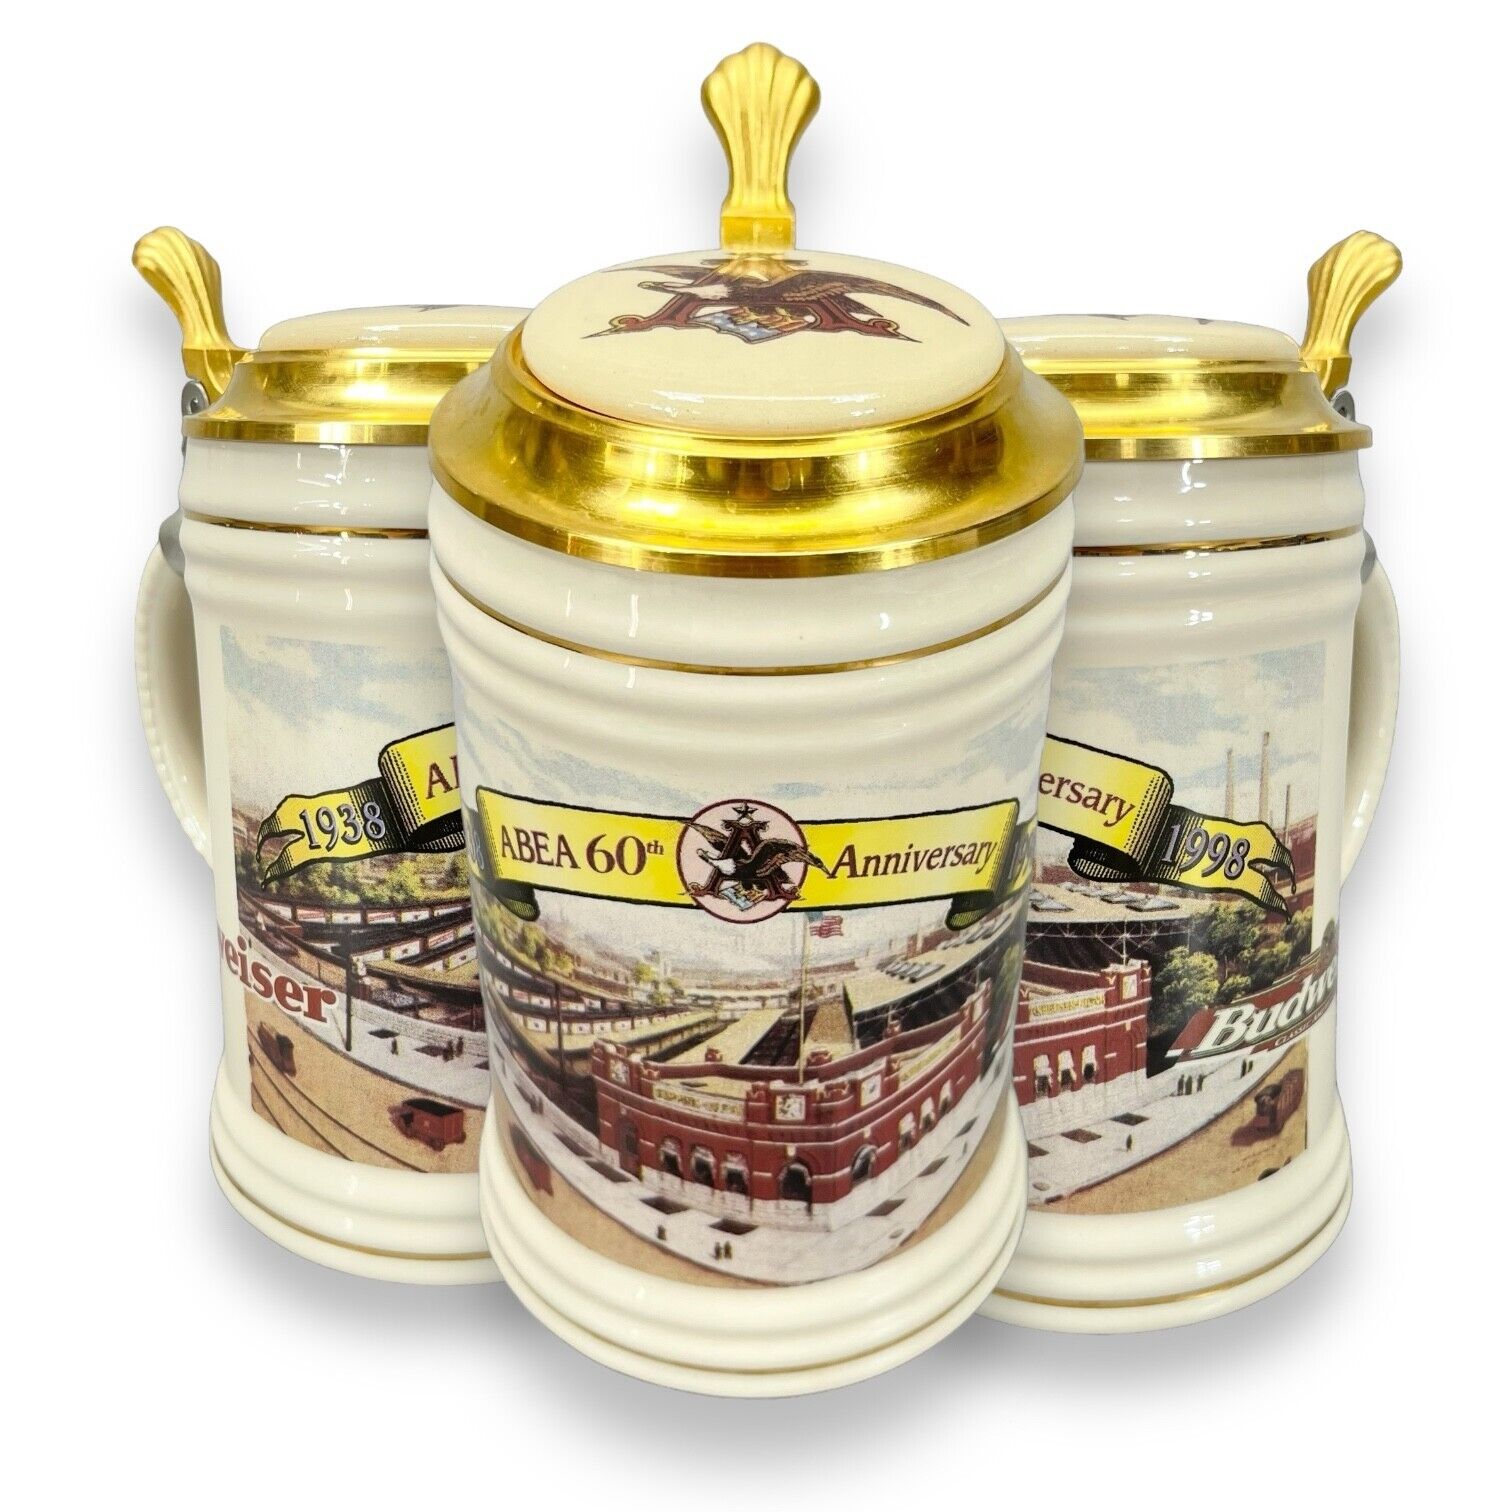 Anheuser Busch Lidded Beer Stein ABEA 60th Anniversary 1938-1998 Numbered 292